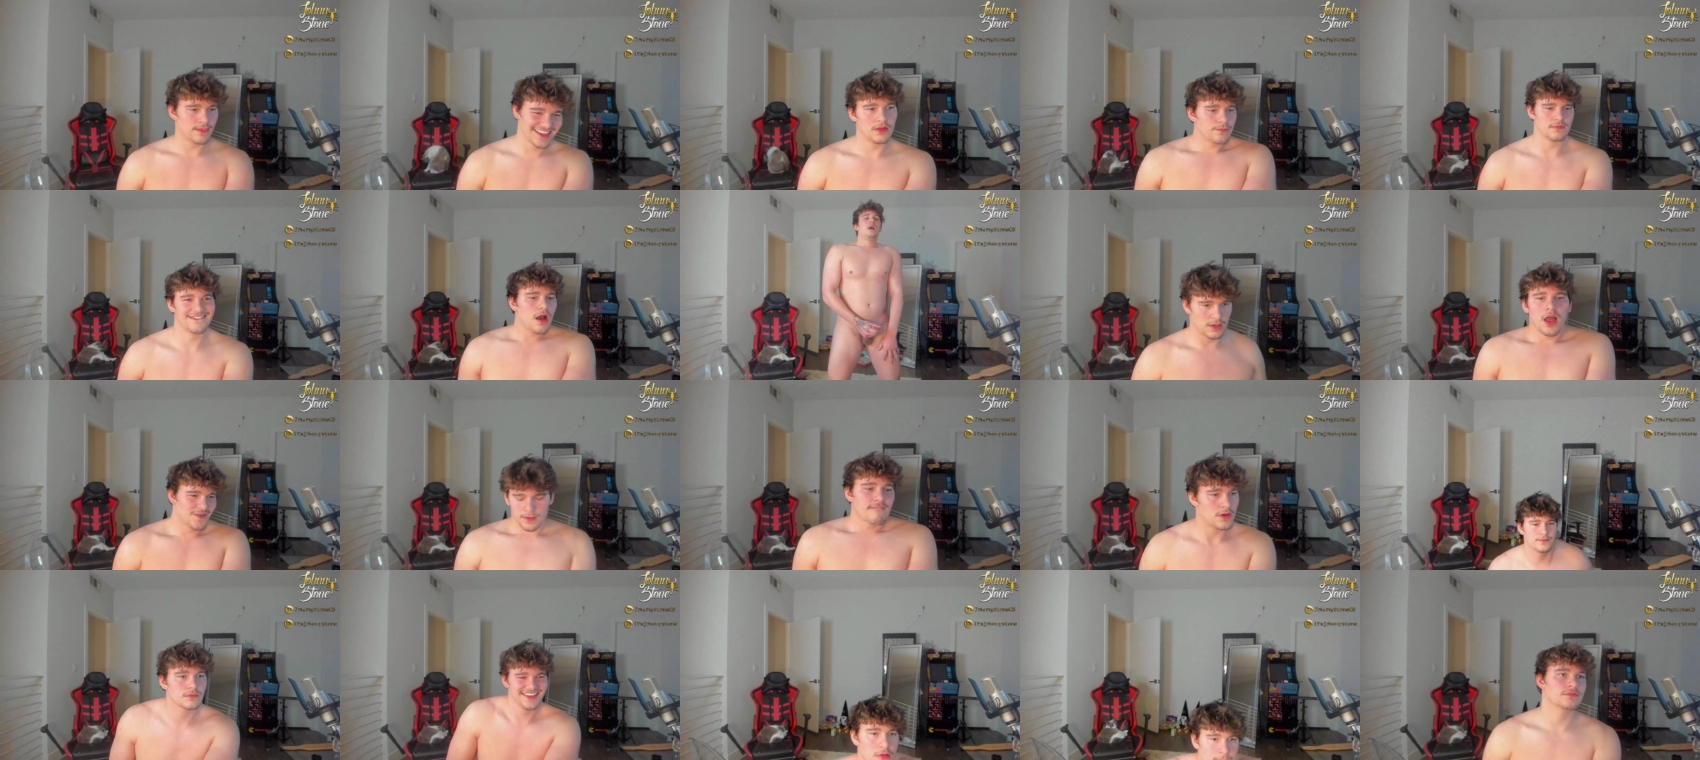 thejohnnystone  12-04-2022 Males naked